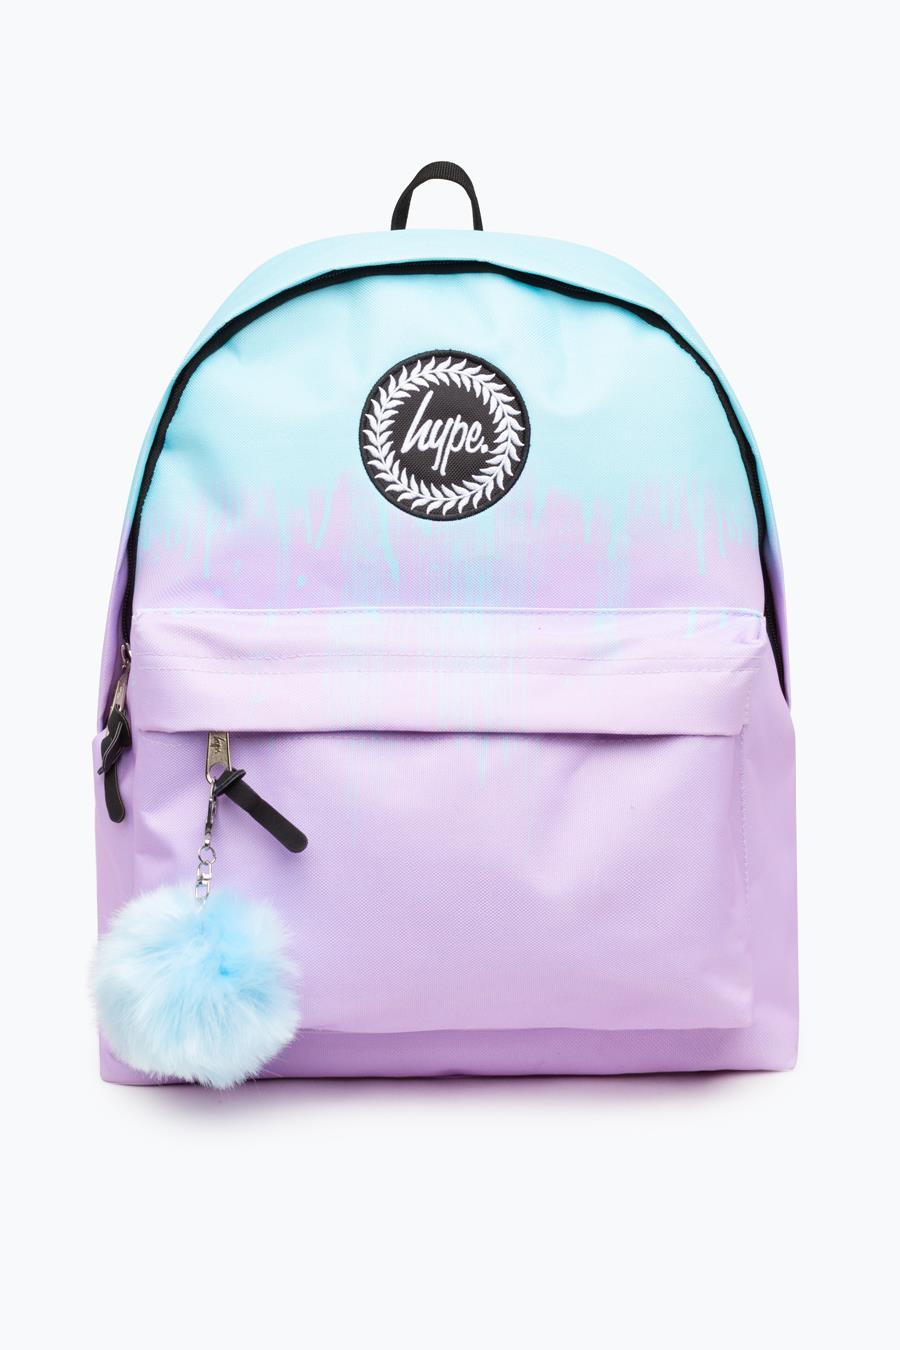 HYPE BLUE DRIPS BACKPACK | Hype.